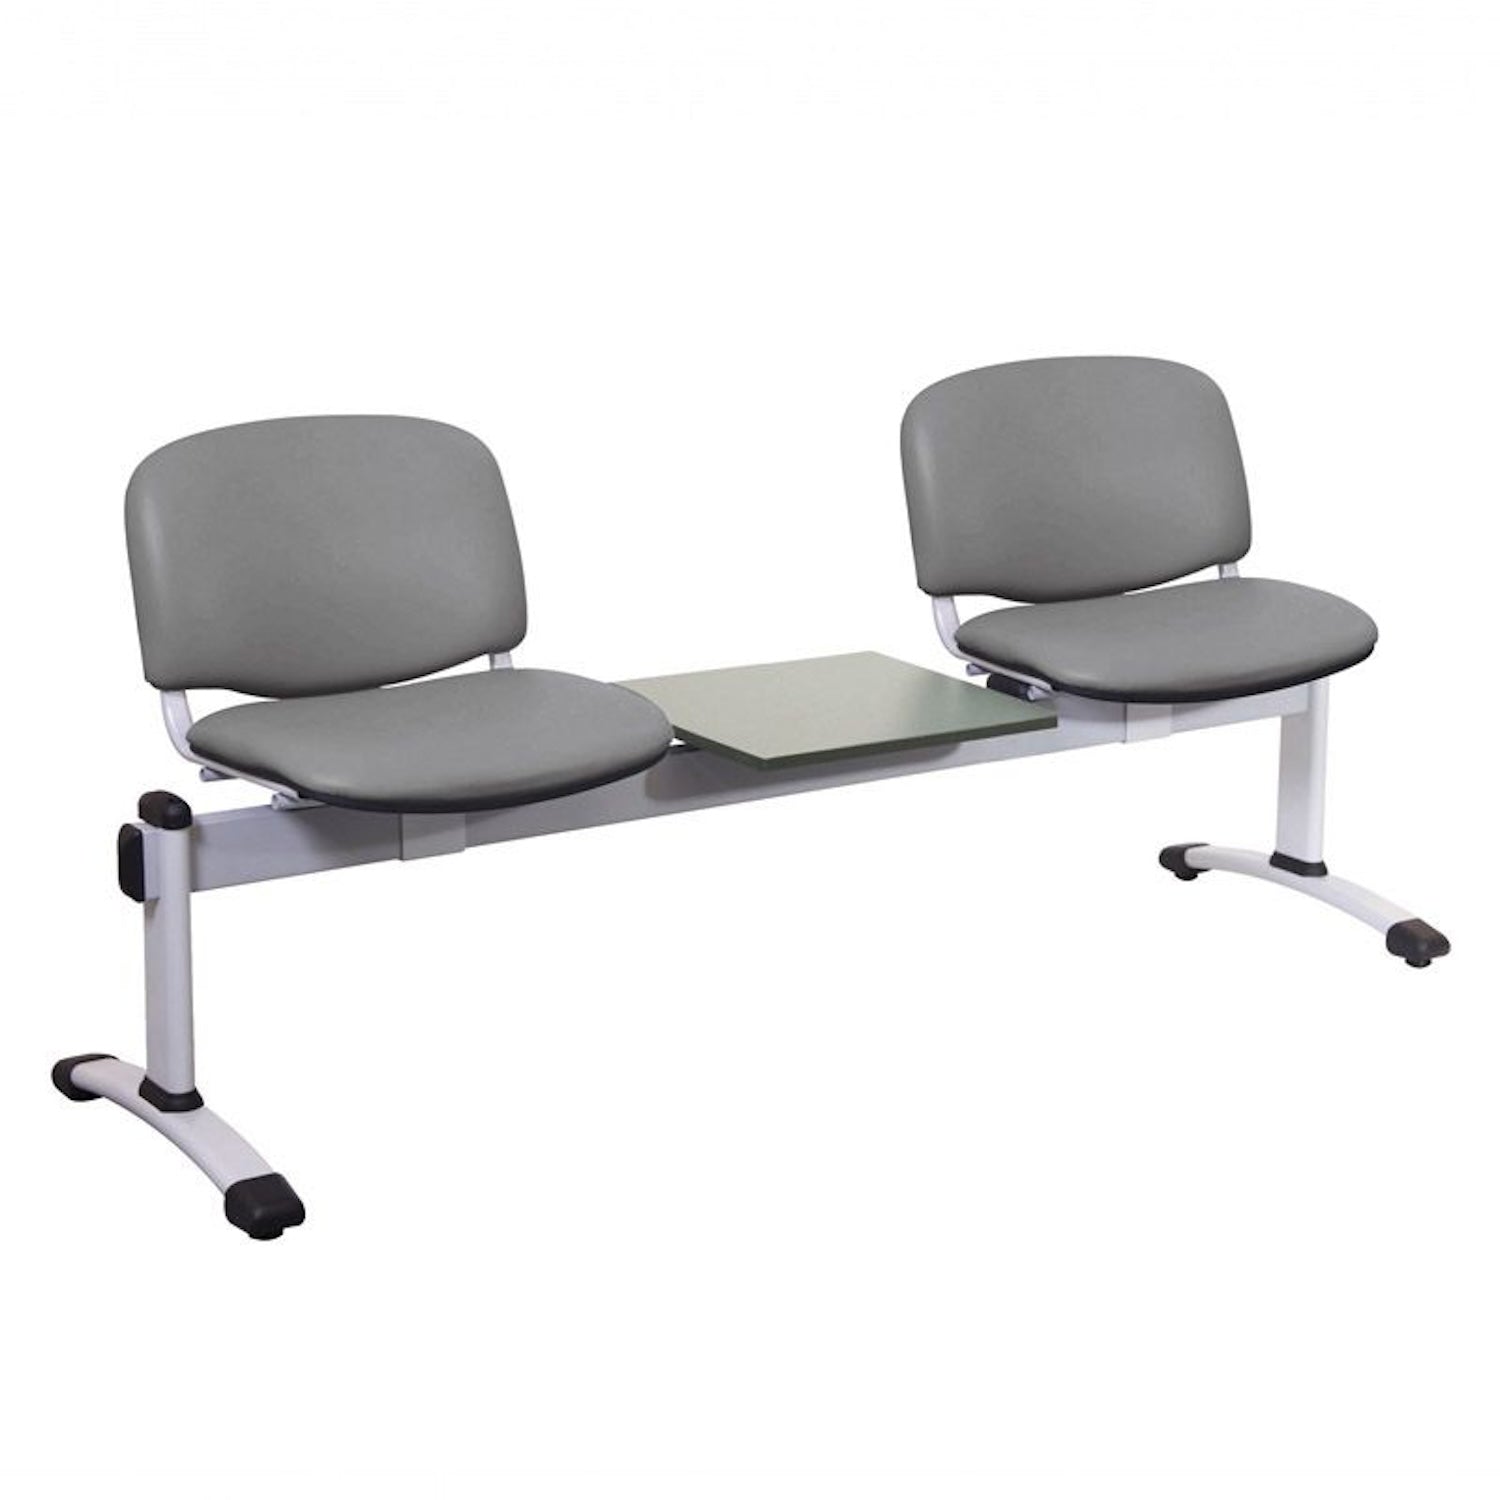 Sunflower Visitor 2 Anti-bacterial Vinyl Upholstery Seats & 1 Table Module in Grey